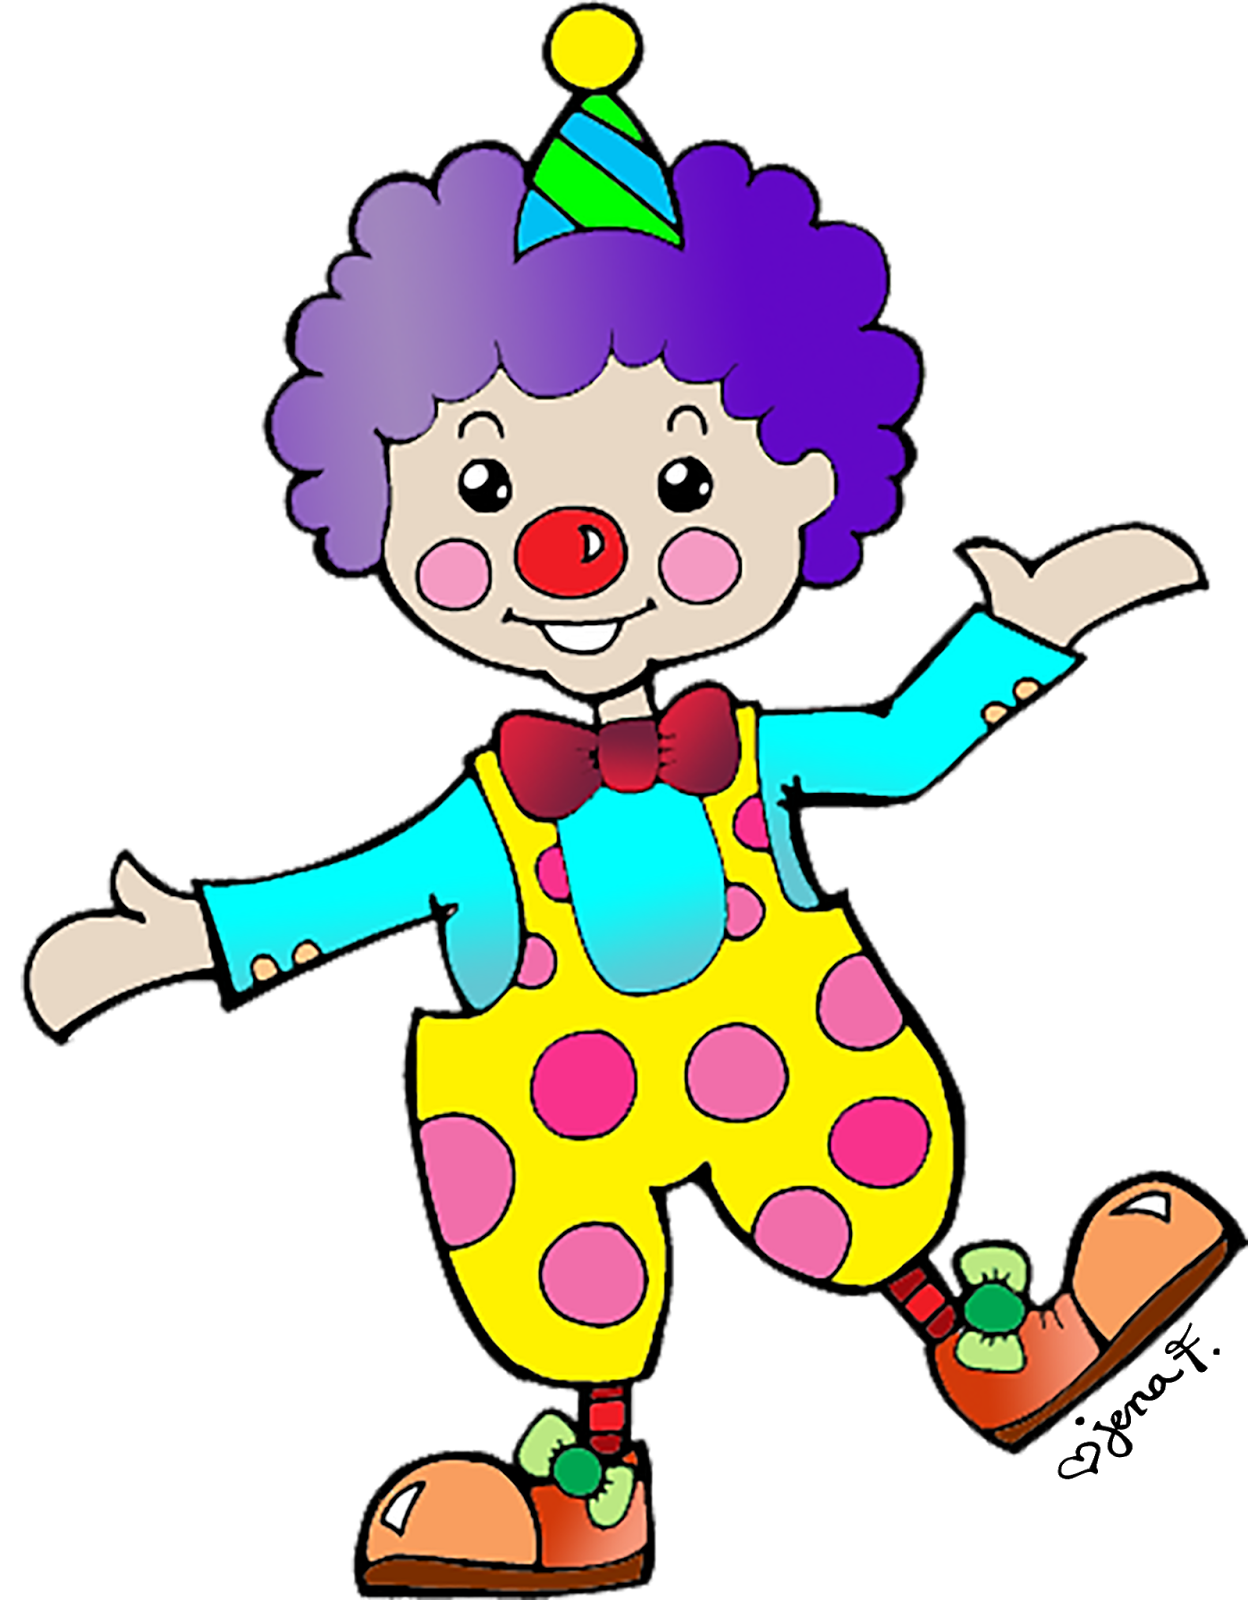 clown with balloons clipart - photo #39